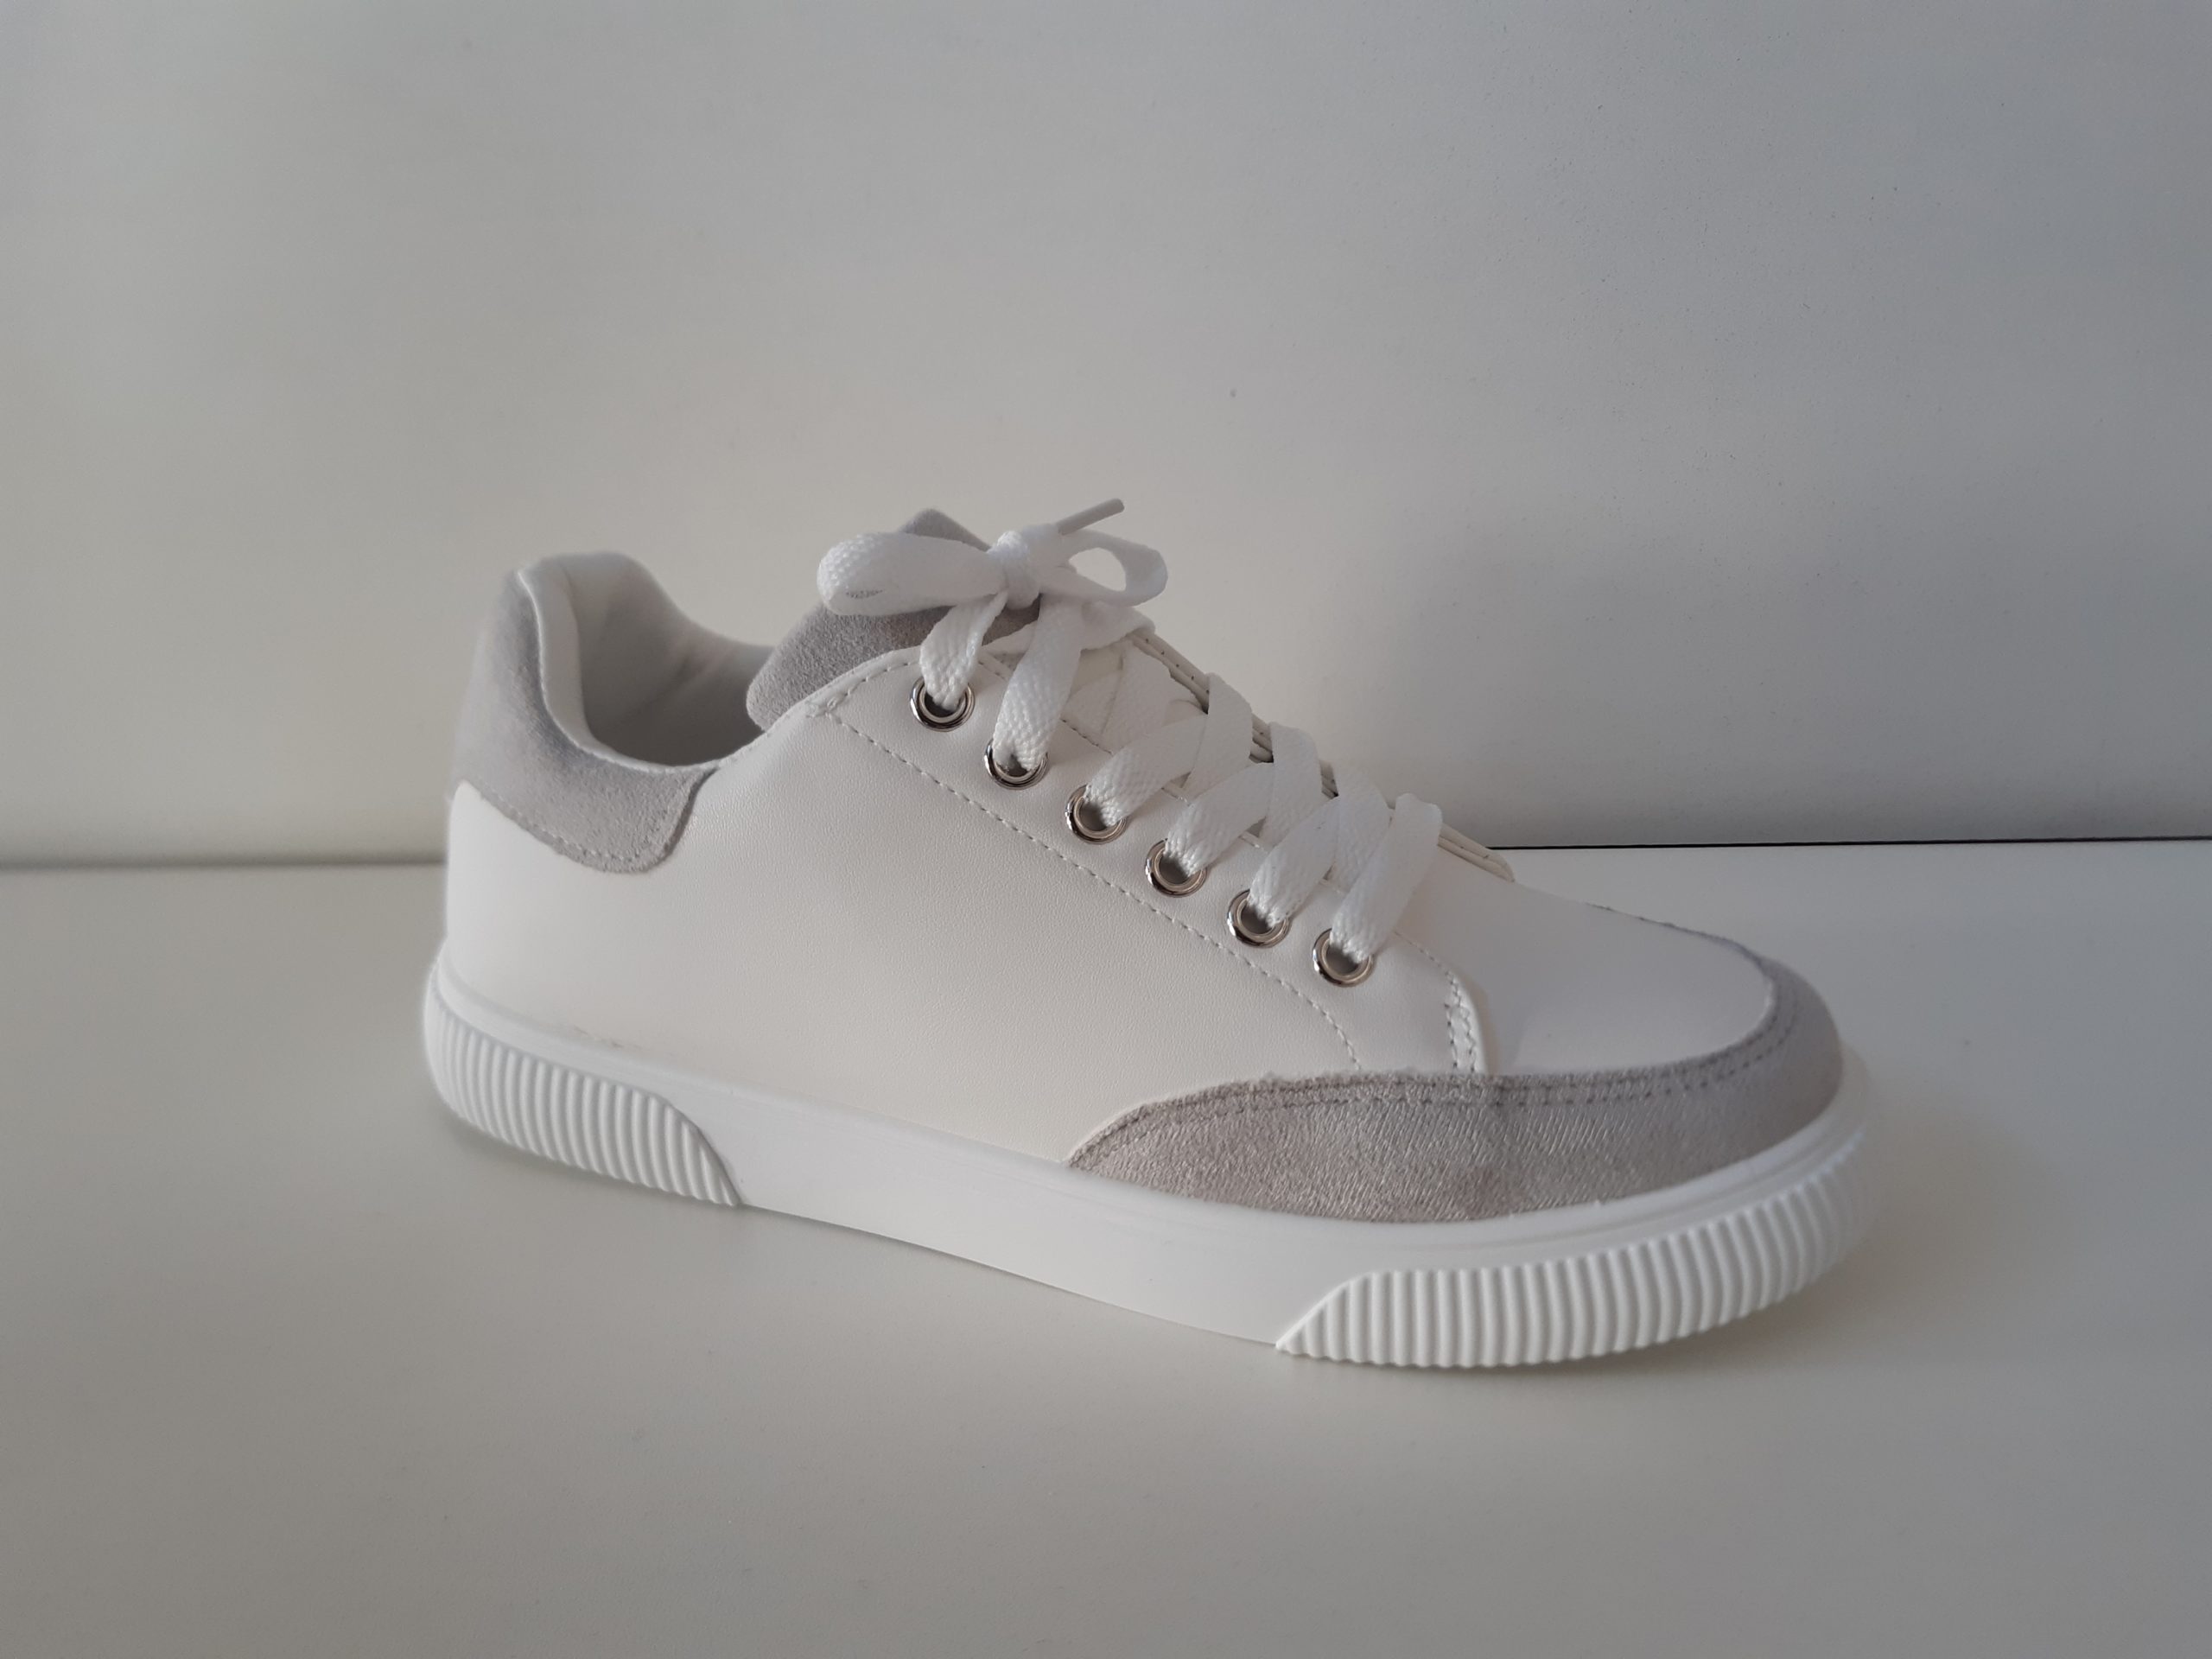 Runners white-grey flat sole – Bella Shoes – Unique Women Shoes collection